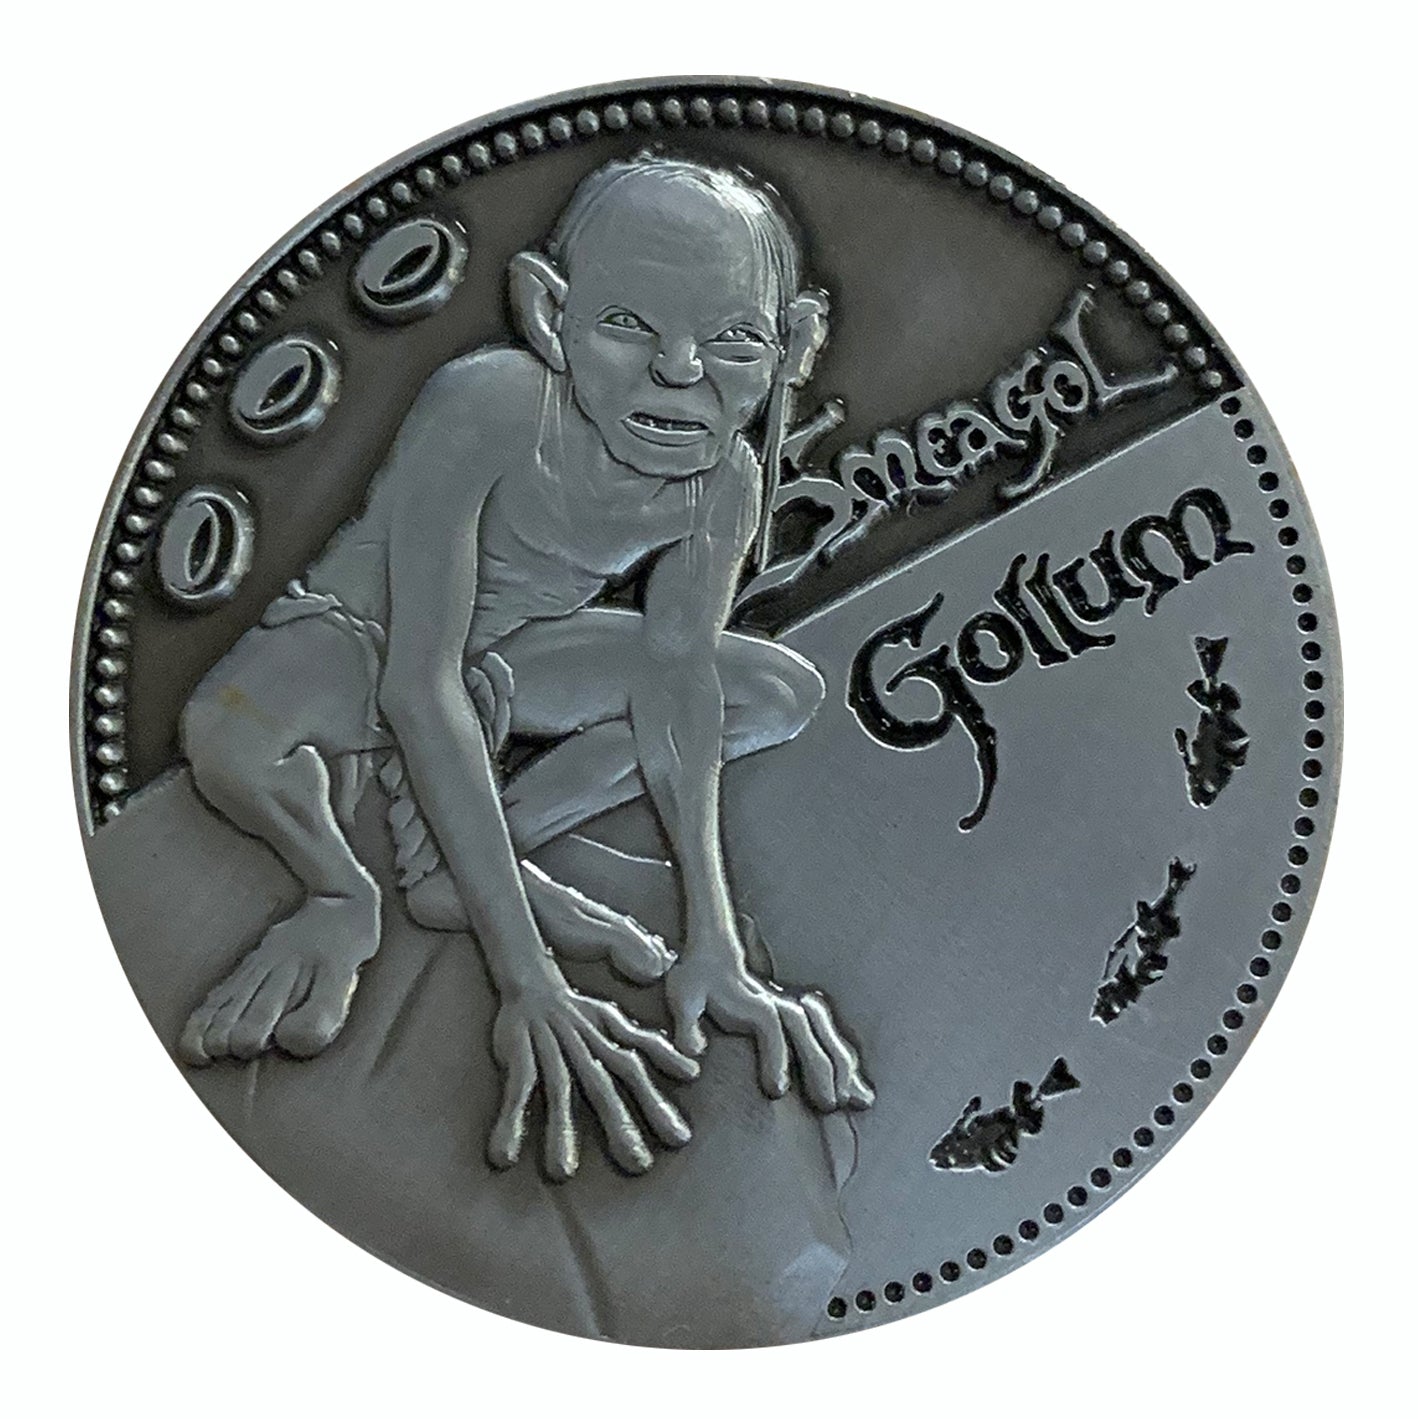 The Lord of the Rings Limited Edition Gollum Collectible Coin